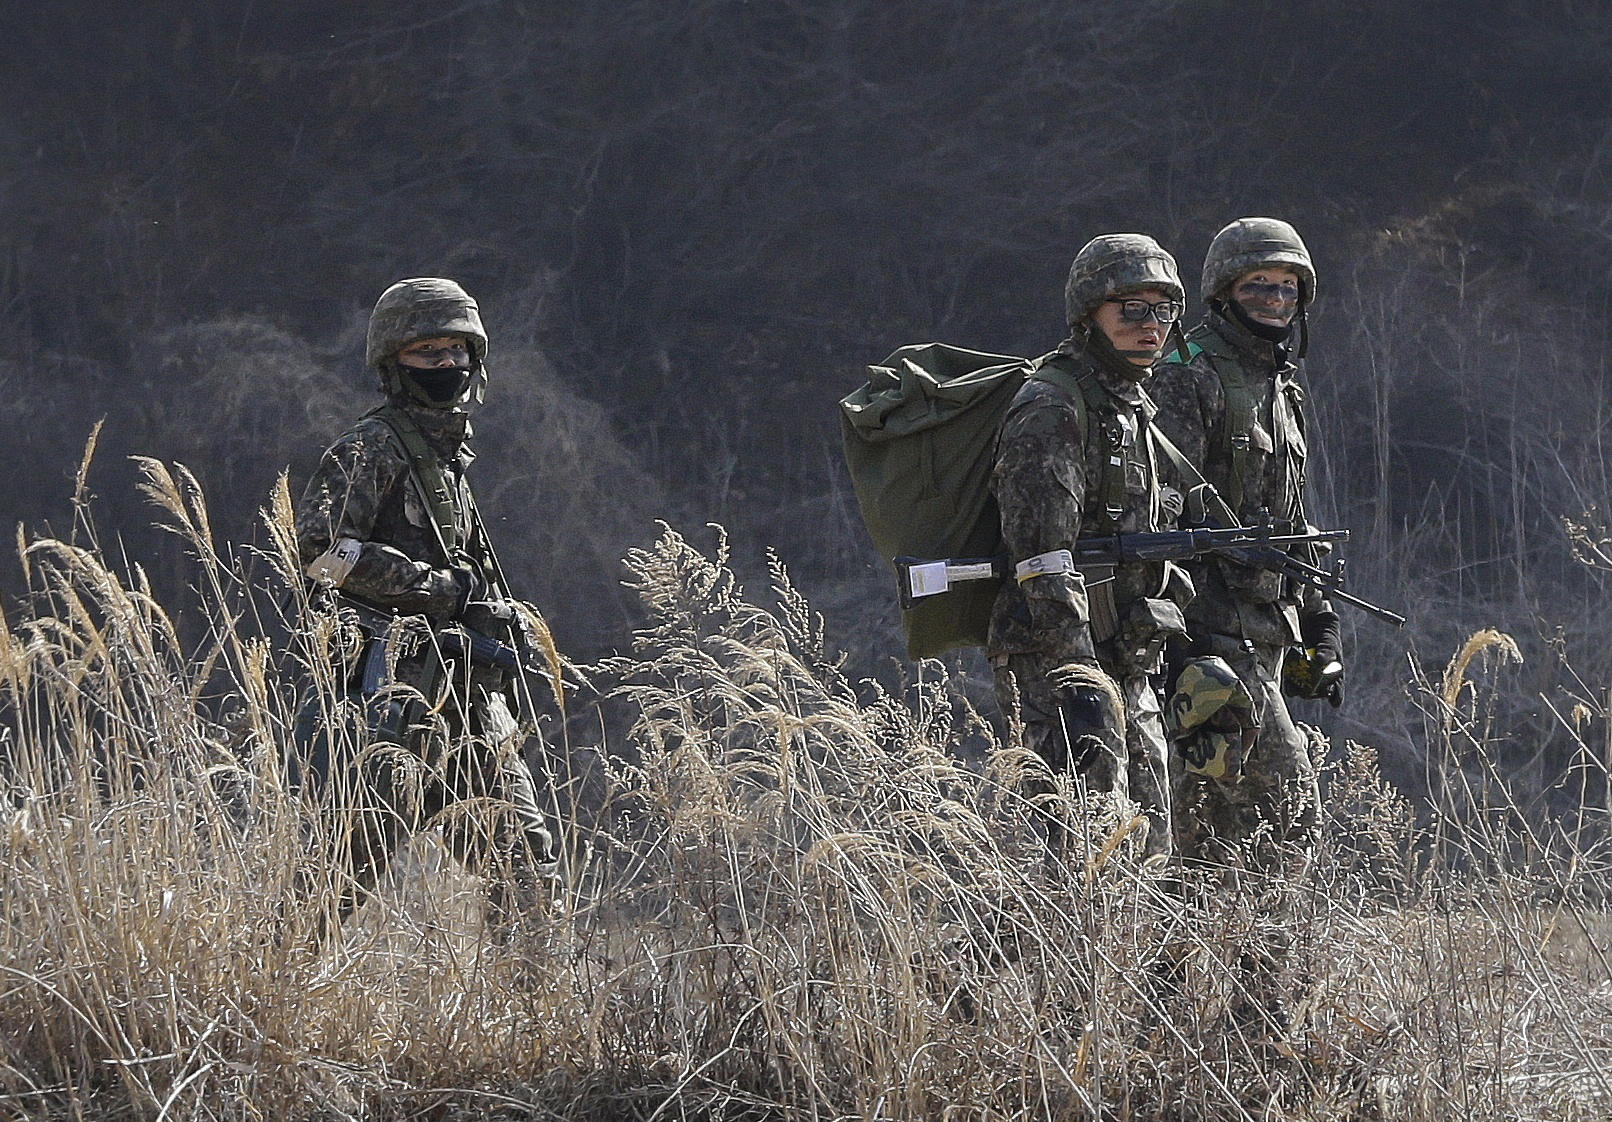 PHOTO: South Korean army soldiers move during their military exercise near the demilitarized zone between the two Koreas in Paju, South Korea, March 2, 2015. 